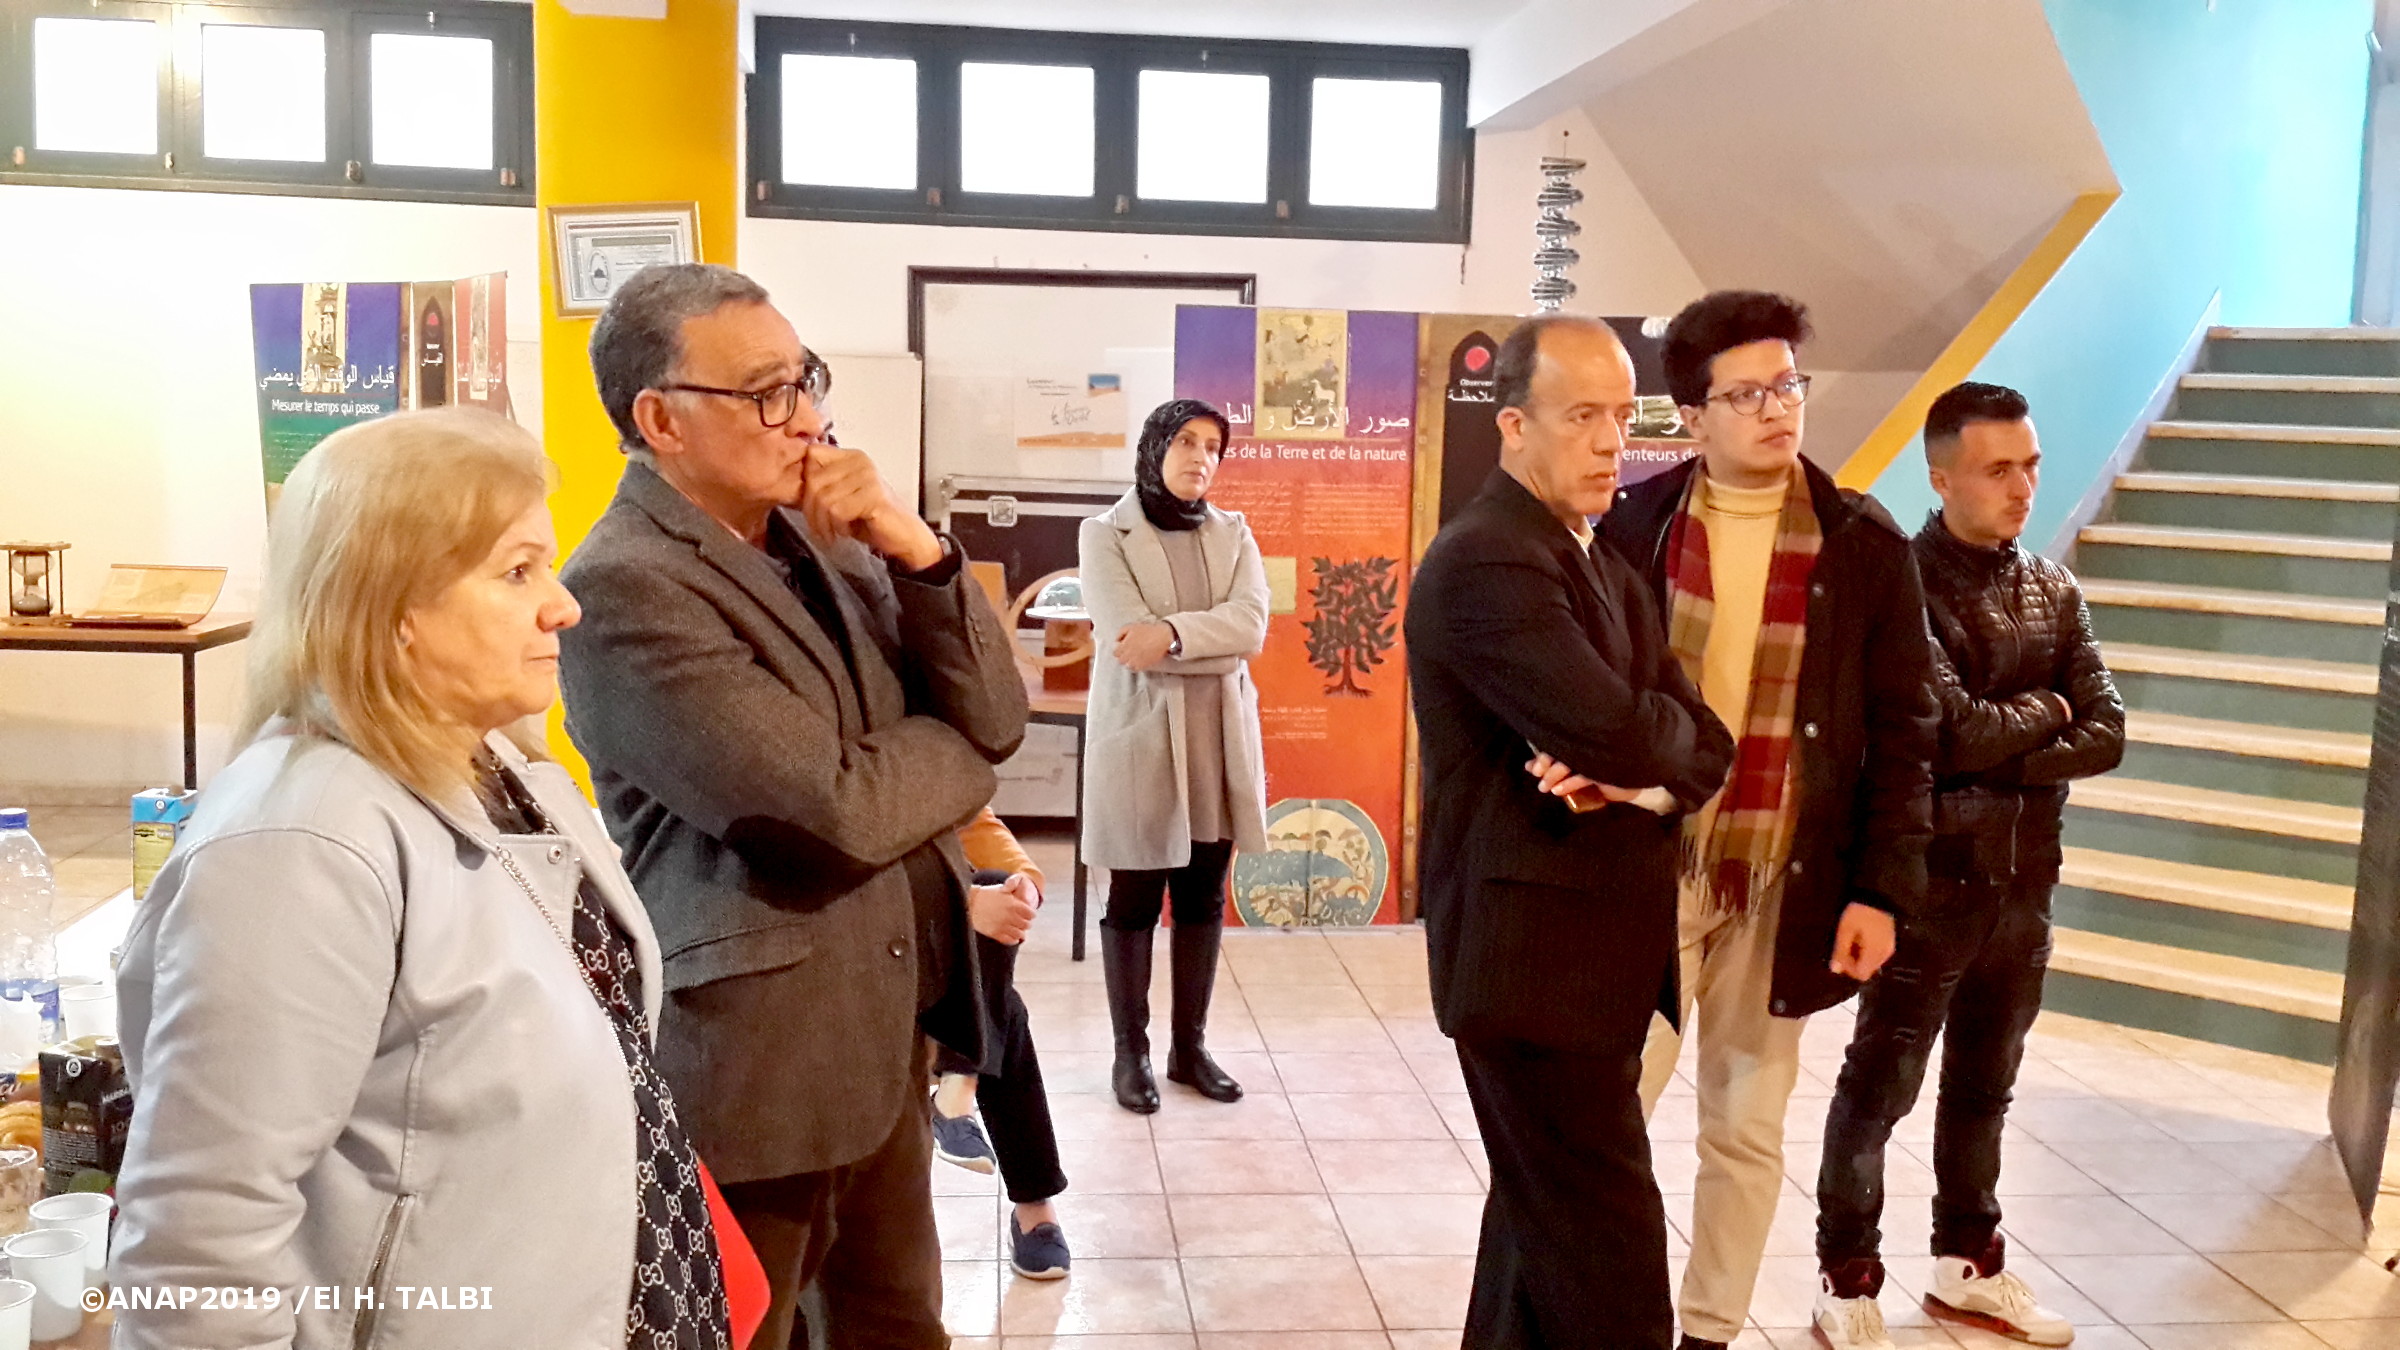 Inauguration Expo "Quand les sciences parlent arabe" 9